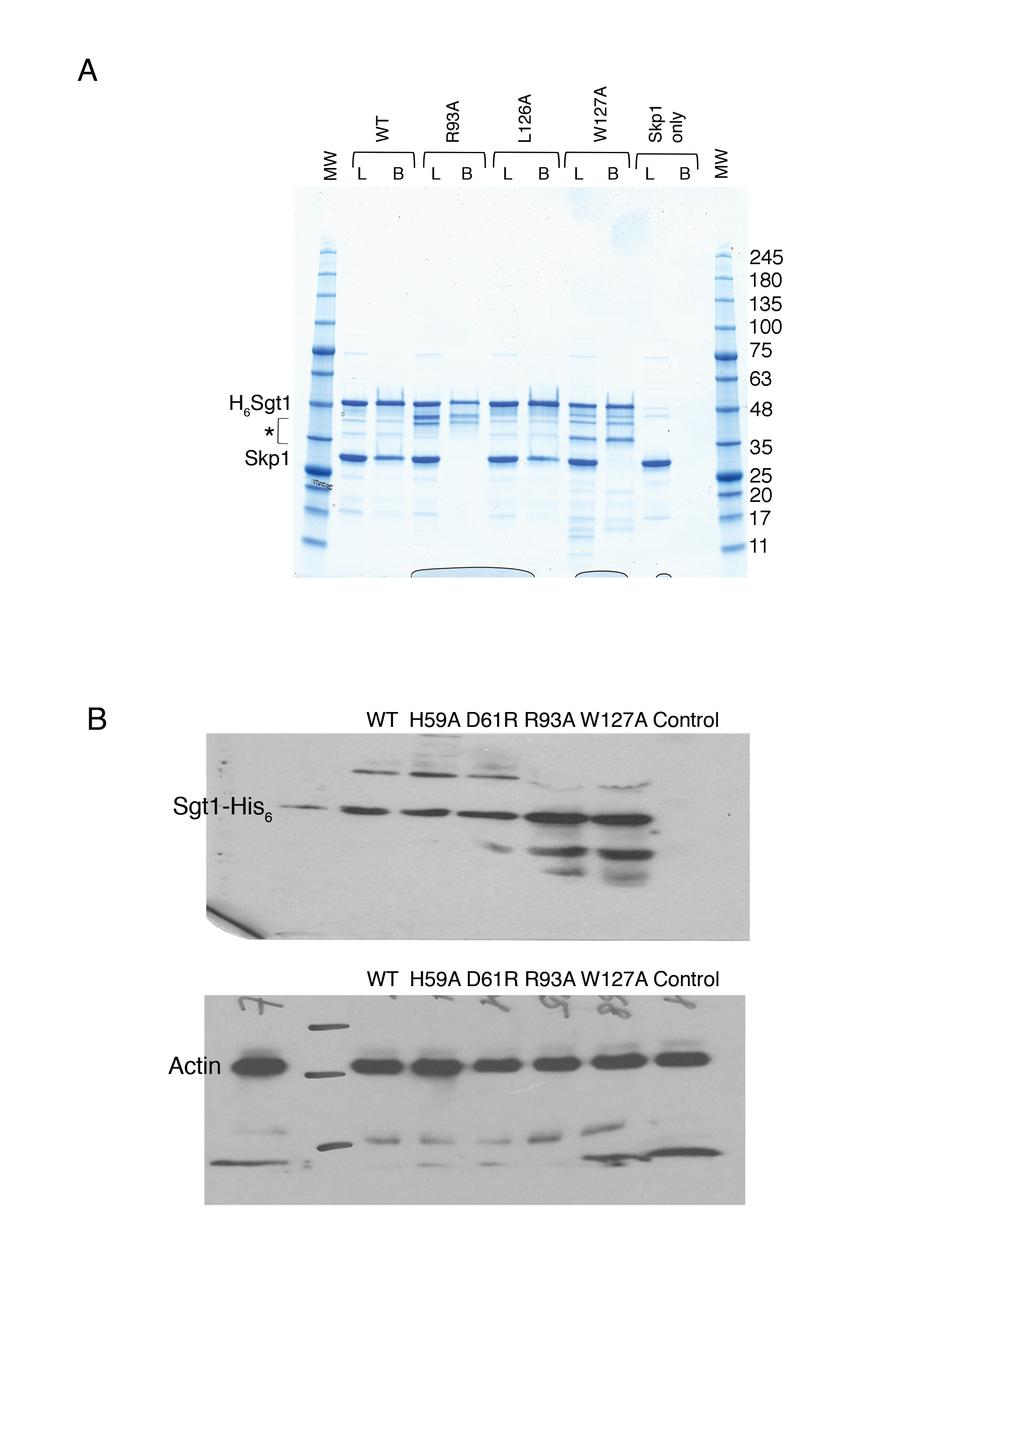 FIGURE S6: FULL GELS AND WESTERN BLOTS (A) Pulldown of full-length Skp1 using His 6 -tagged wild type Sgt1 (WT) and indicated mutants on Ni resin. L = 10% load, B = bound.